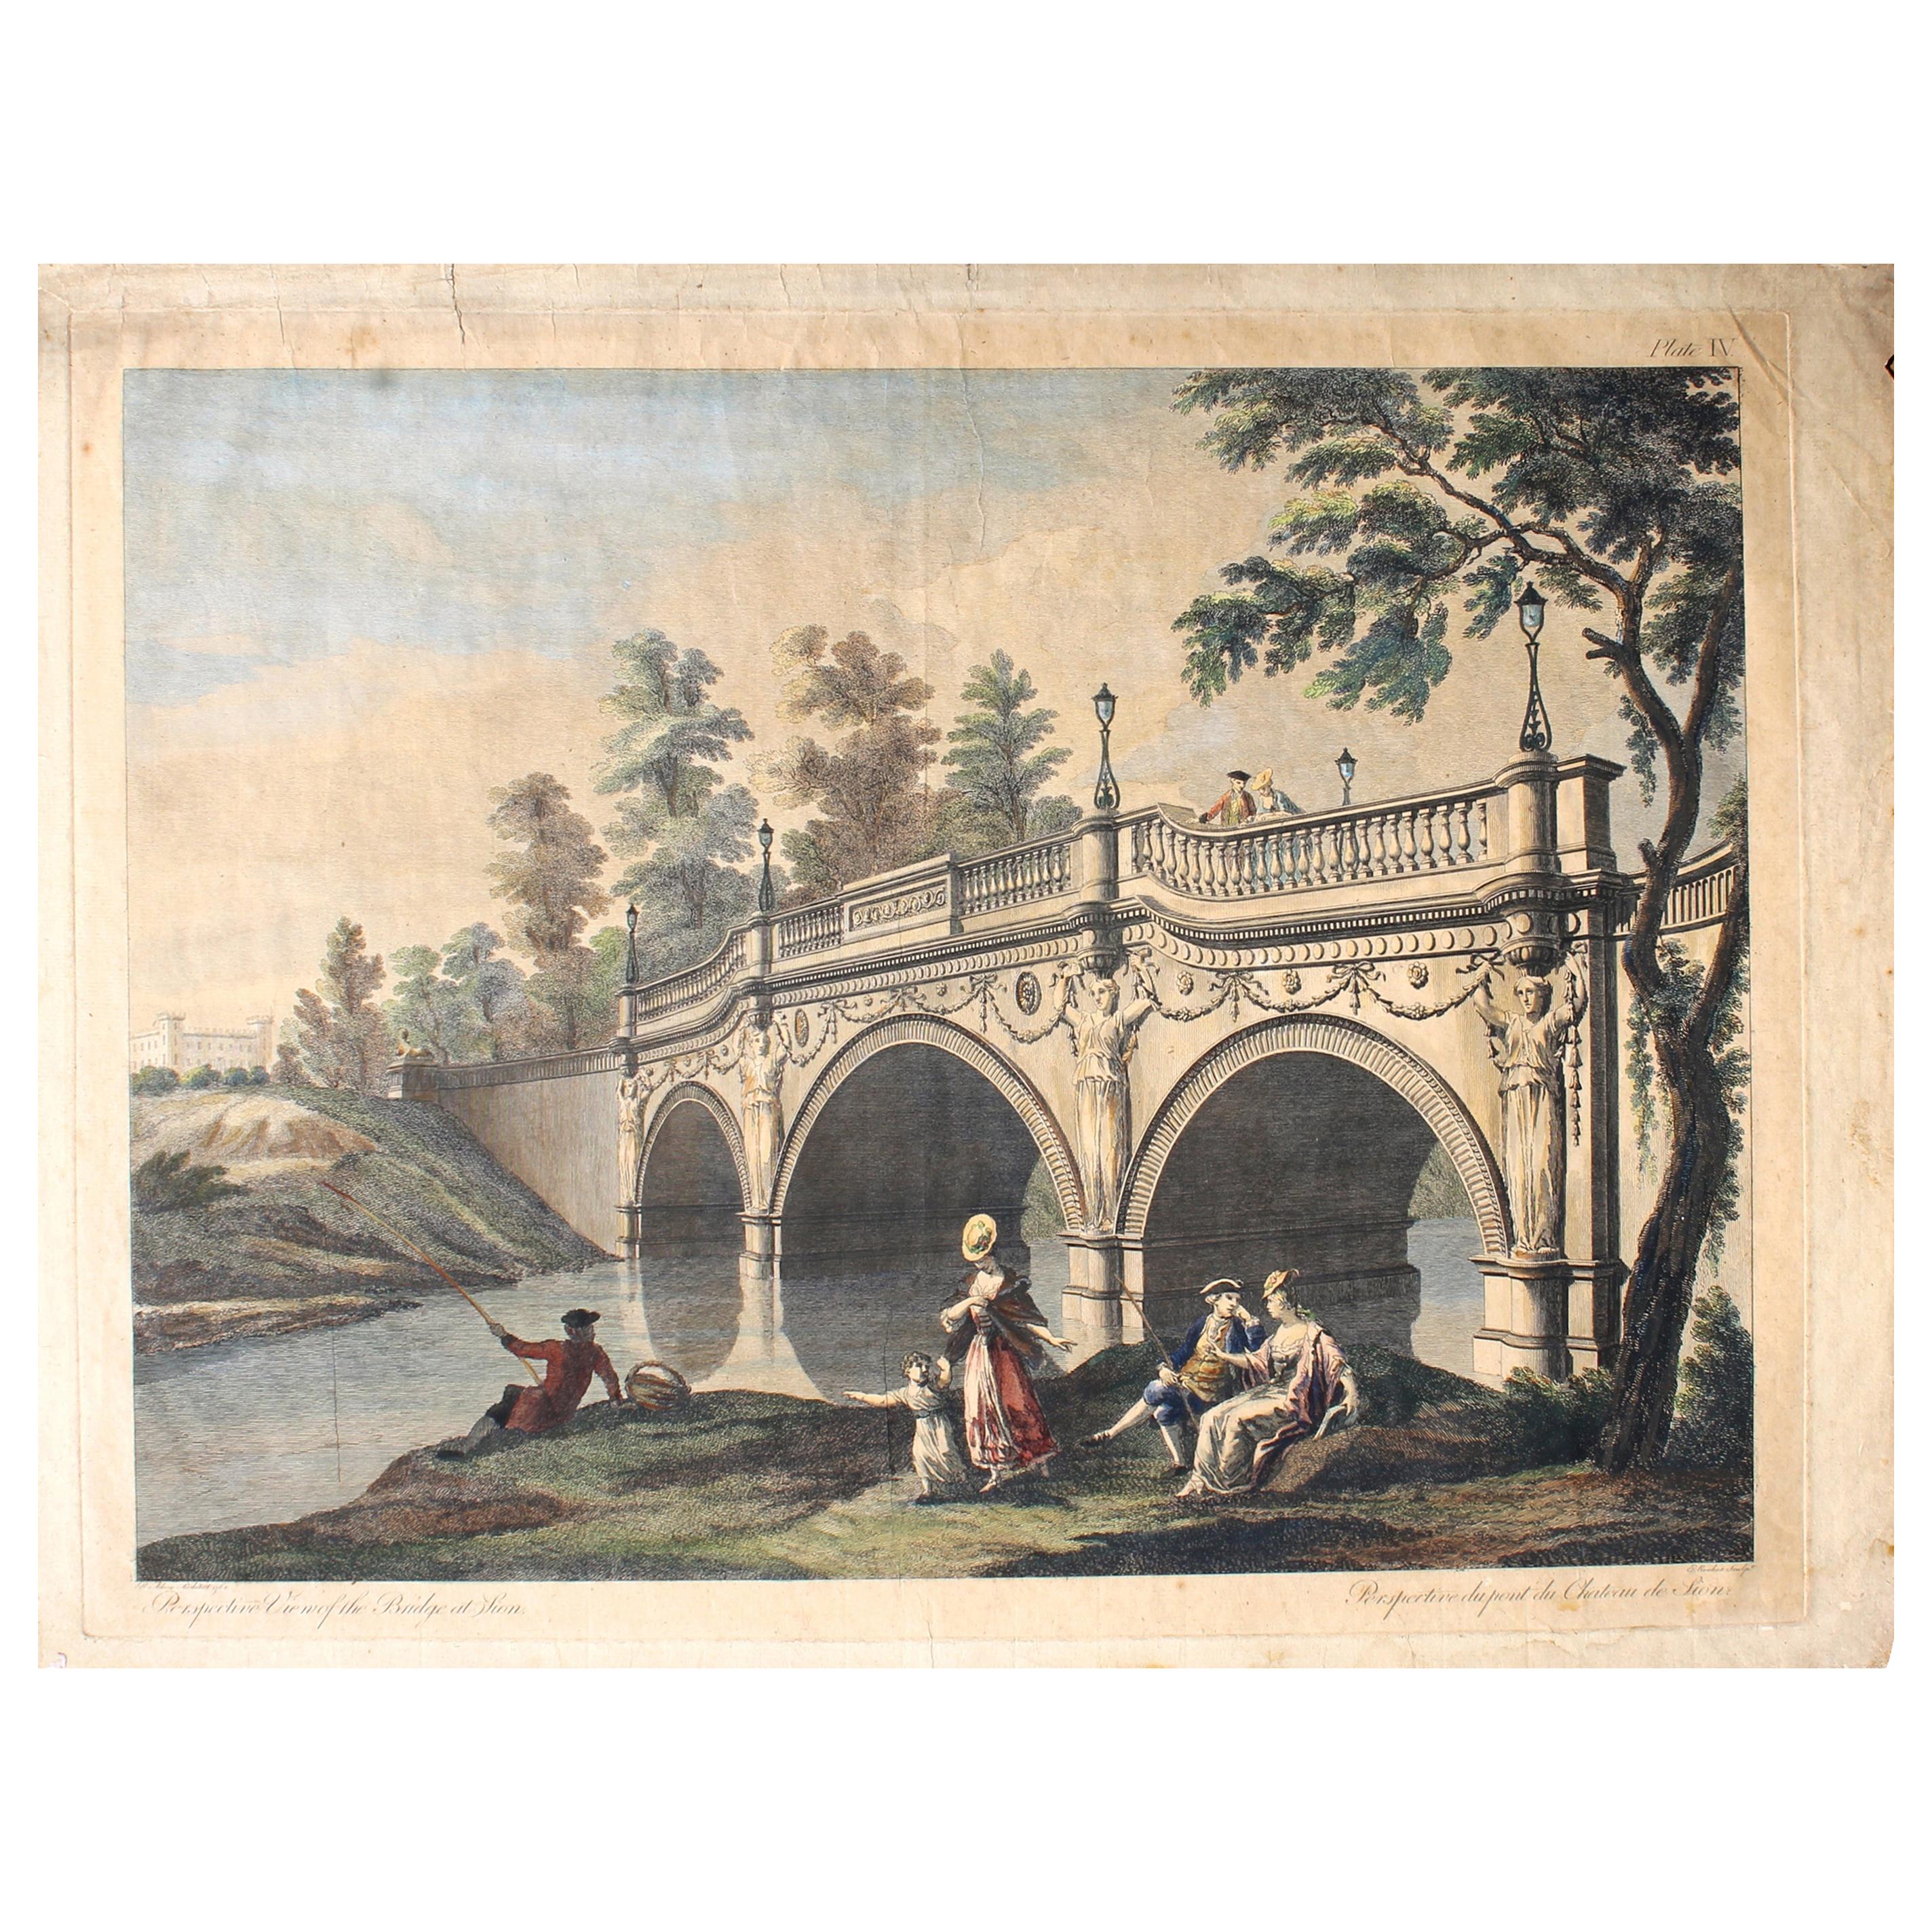 Robert Adam Architect 1768 "Perspective View of The Bridge at Lion" Rare Etching For Sale